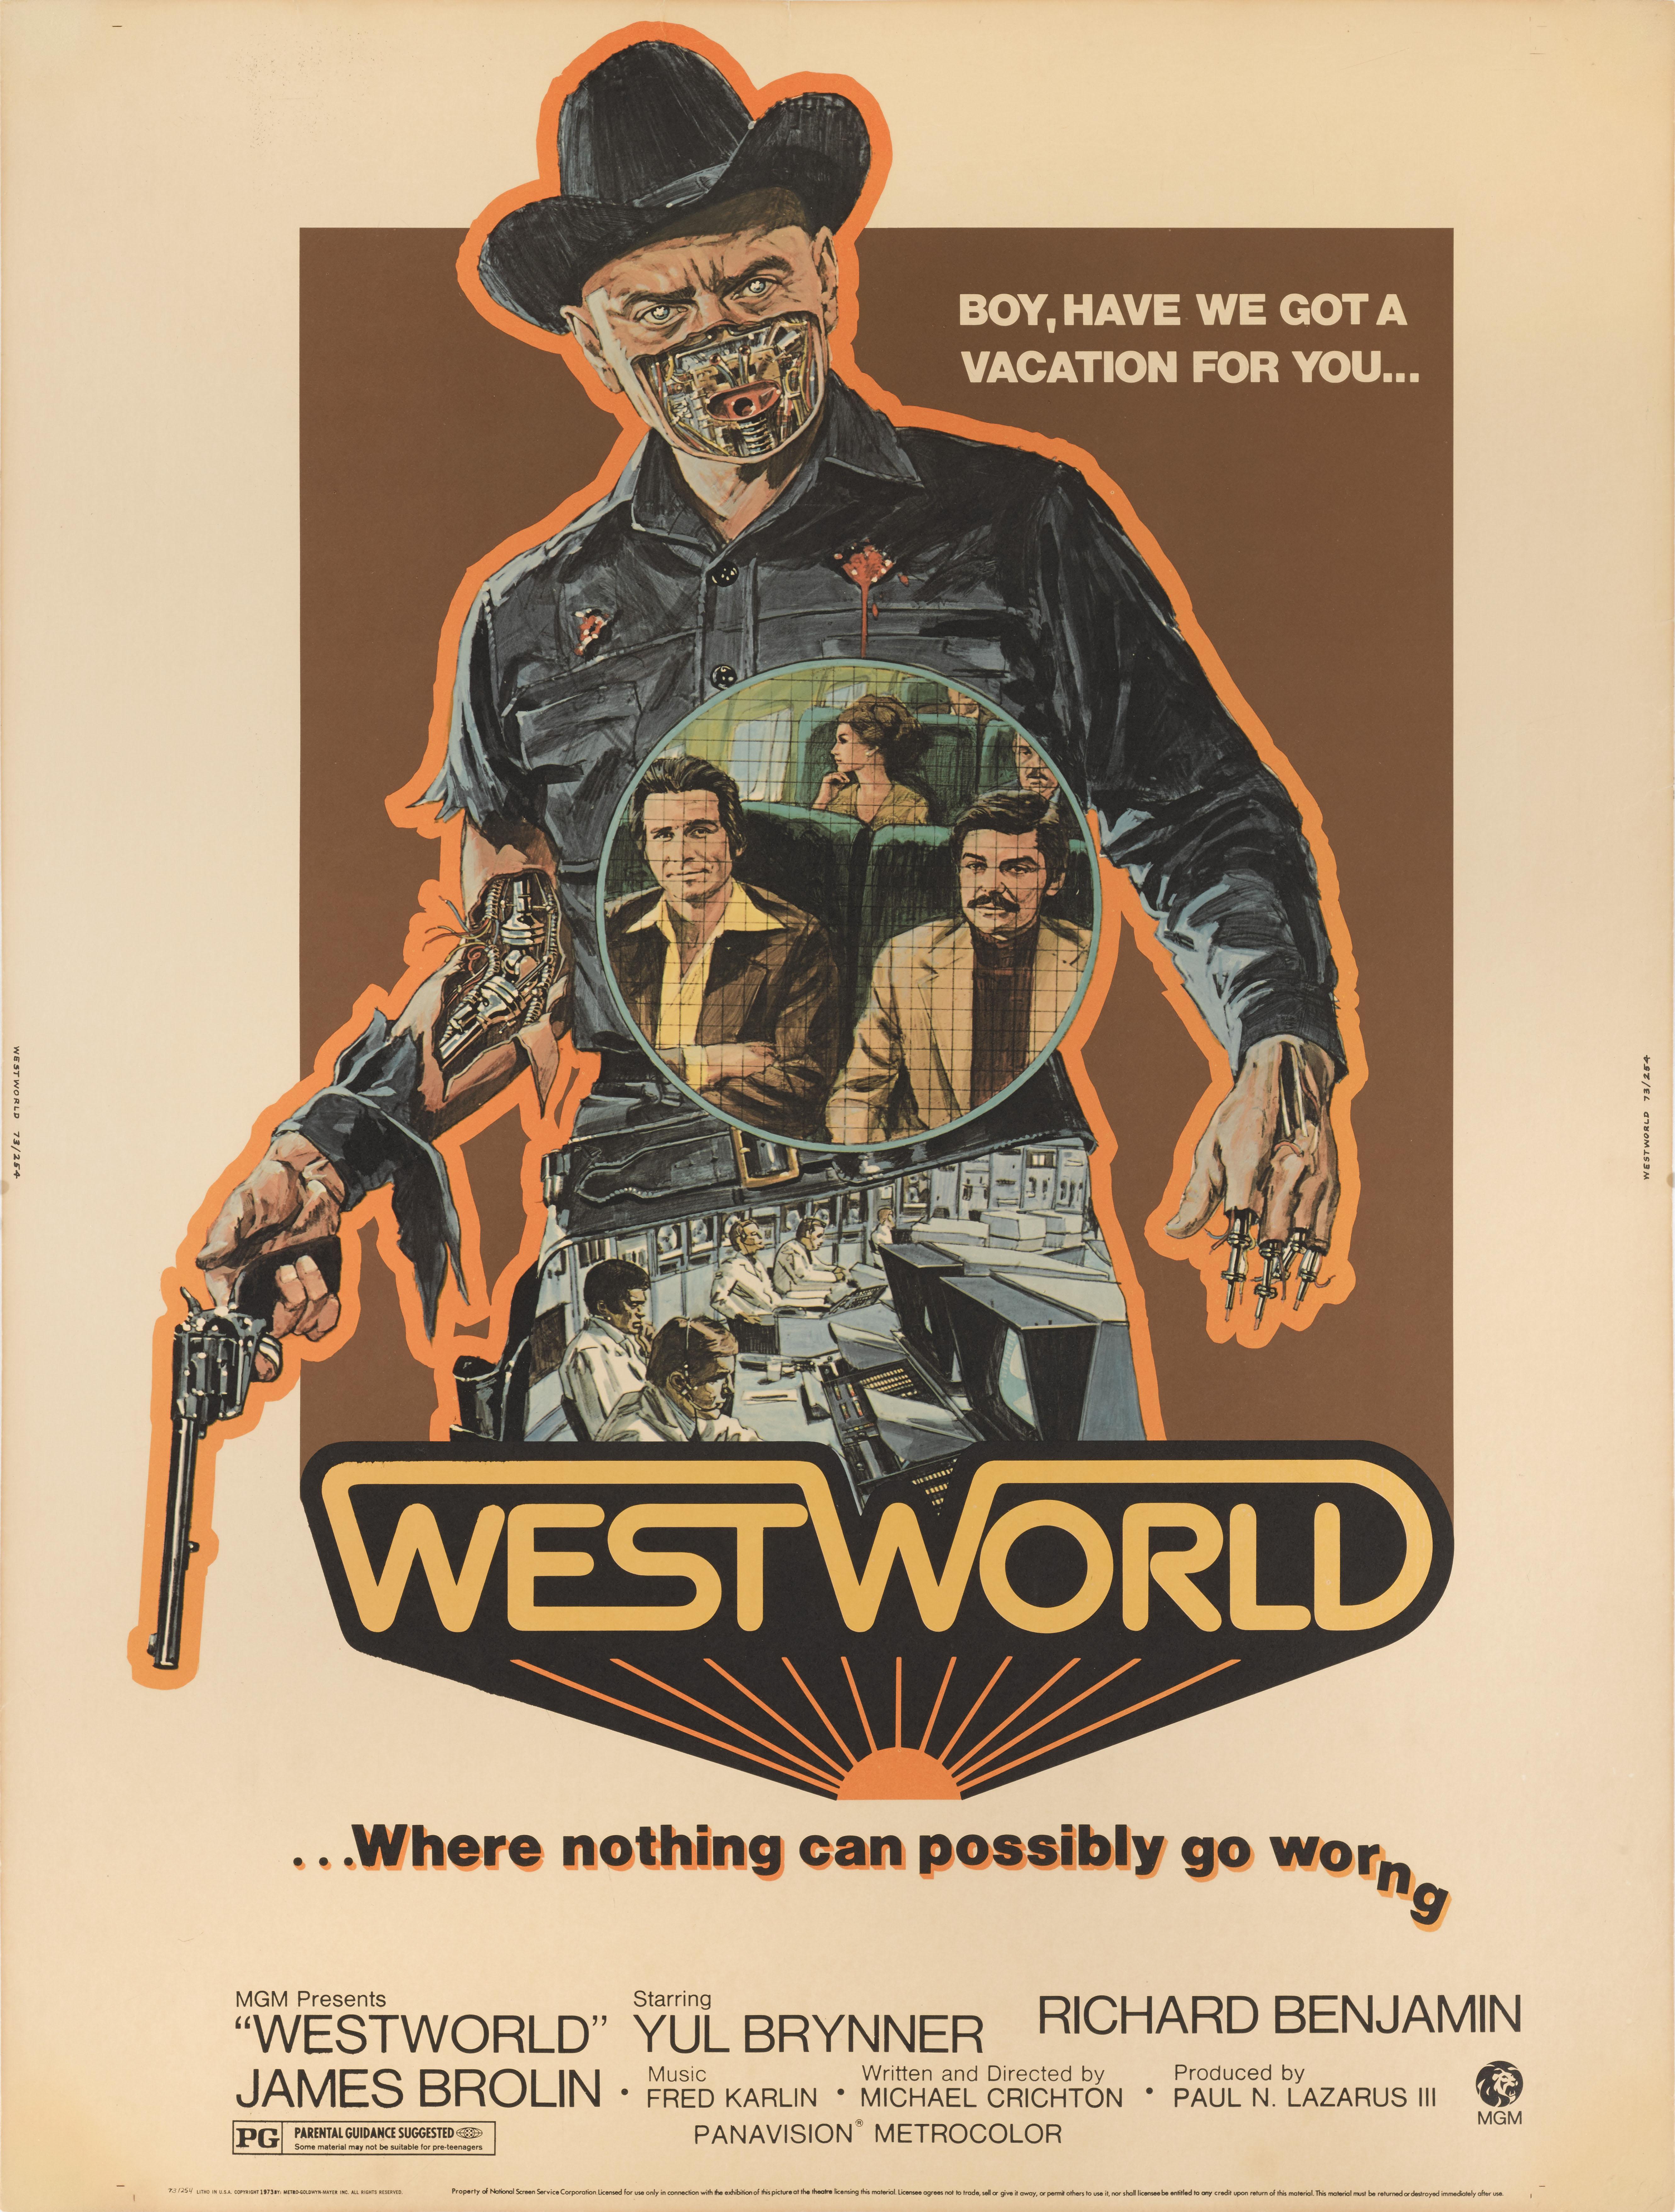 Original US film poster for The  cult science fiction film Westworld 1973.
This film starred Yul Brynner, Richard Benjamin and James Brolin. This film was directed by Michael Crichton.
This poster is unfolded and conservation linen backed and would